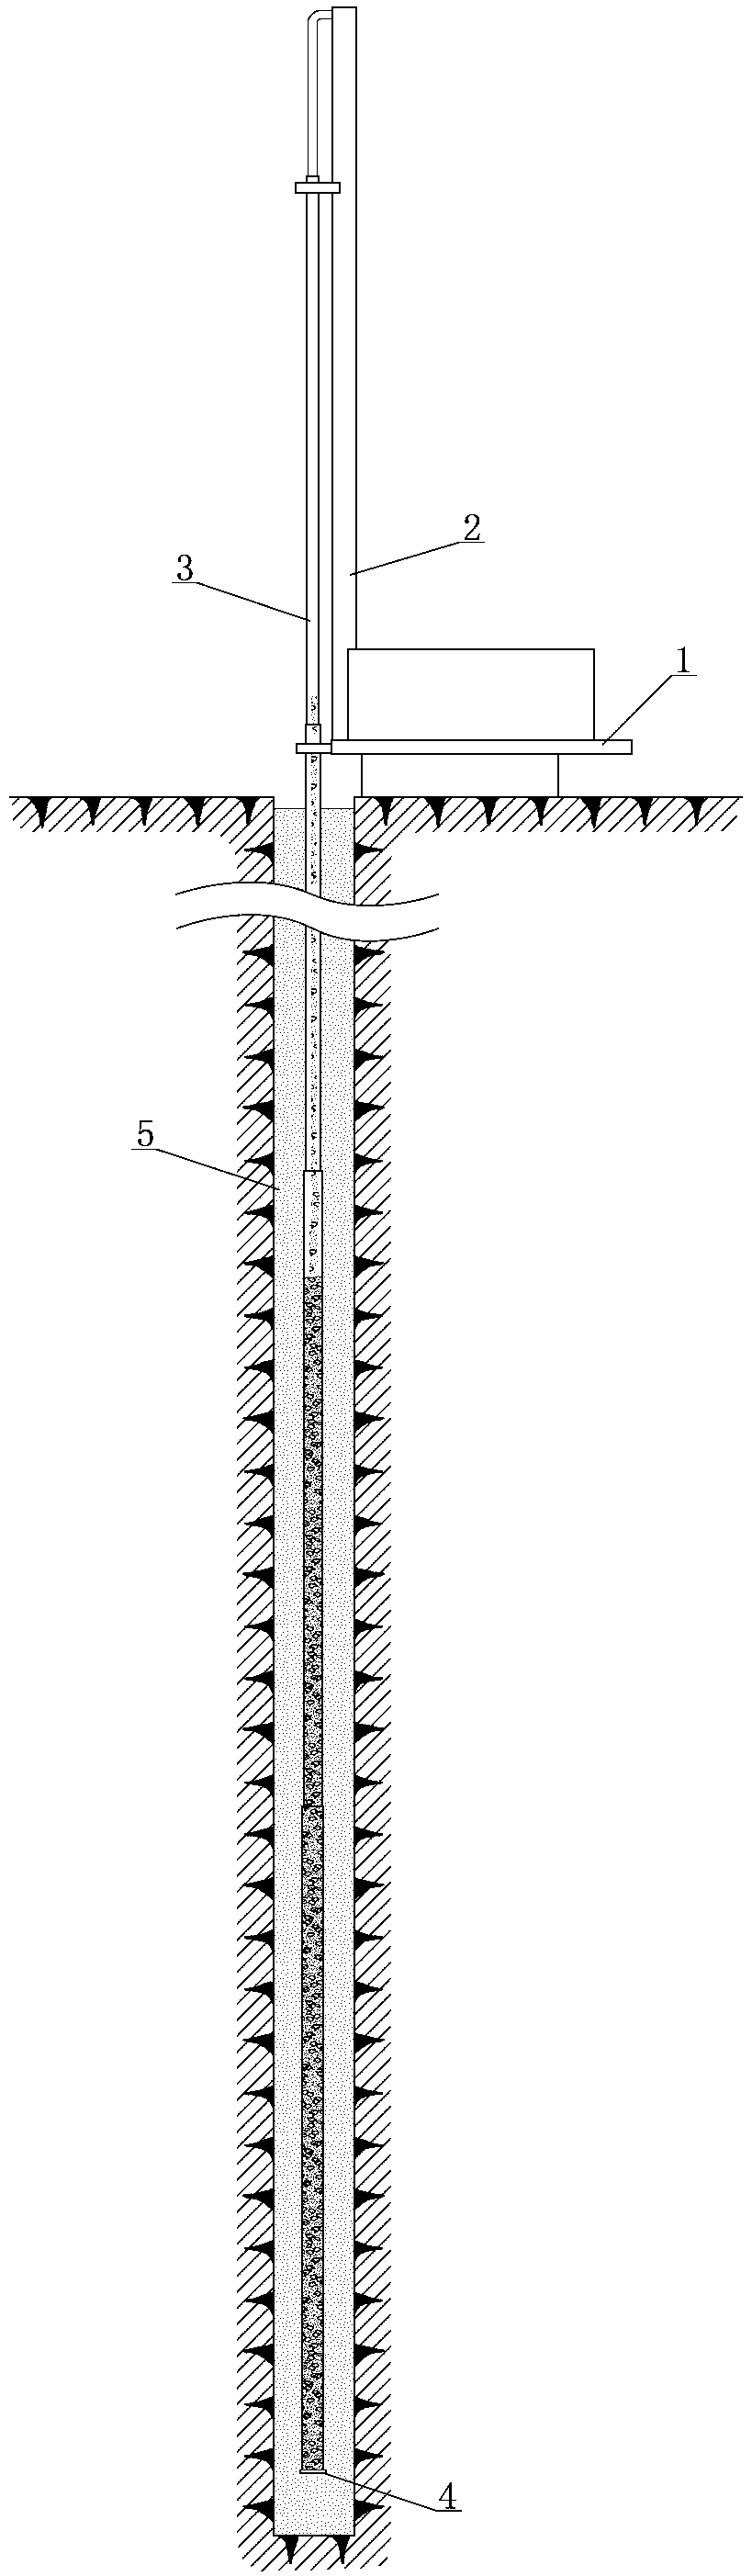 Construction method for pouring concrete pile by using telescopic guide pipe